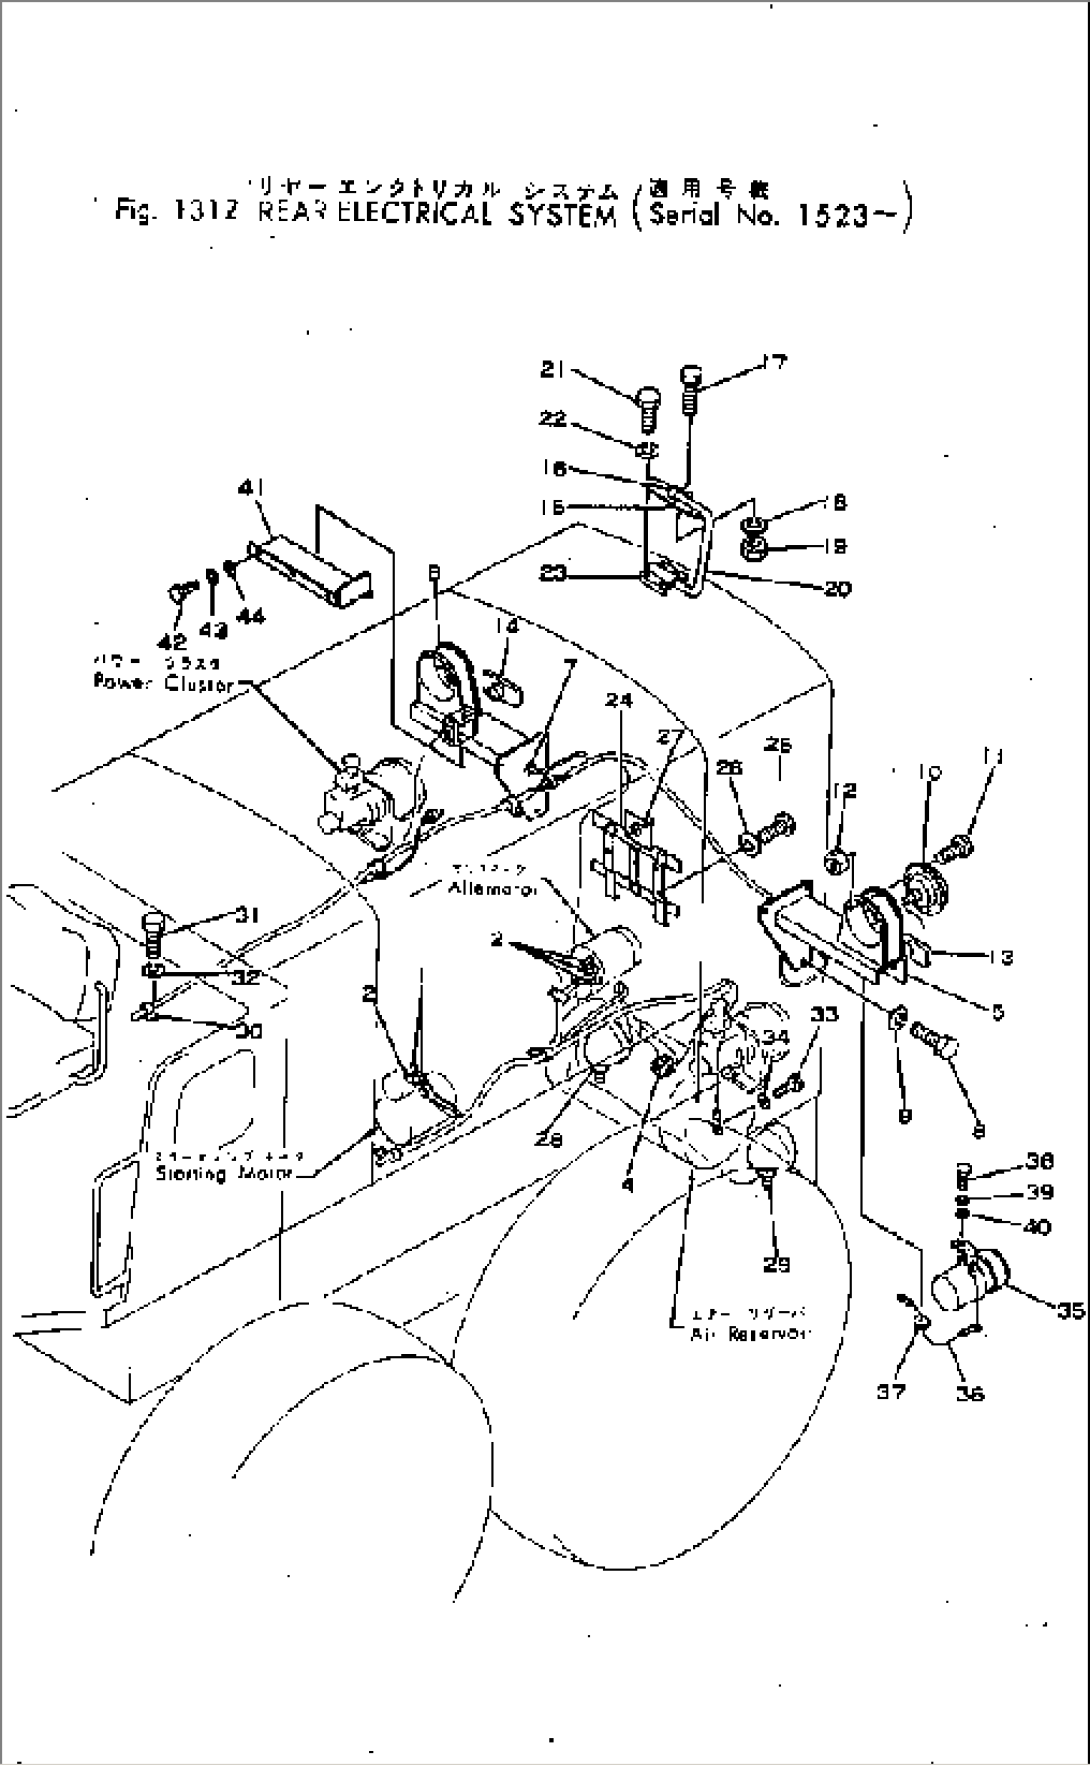 REAR ELECTRICAL SYSTEM(#1523-)